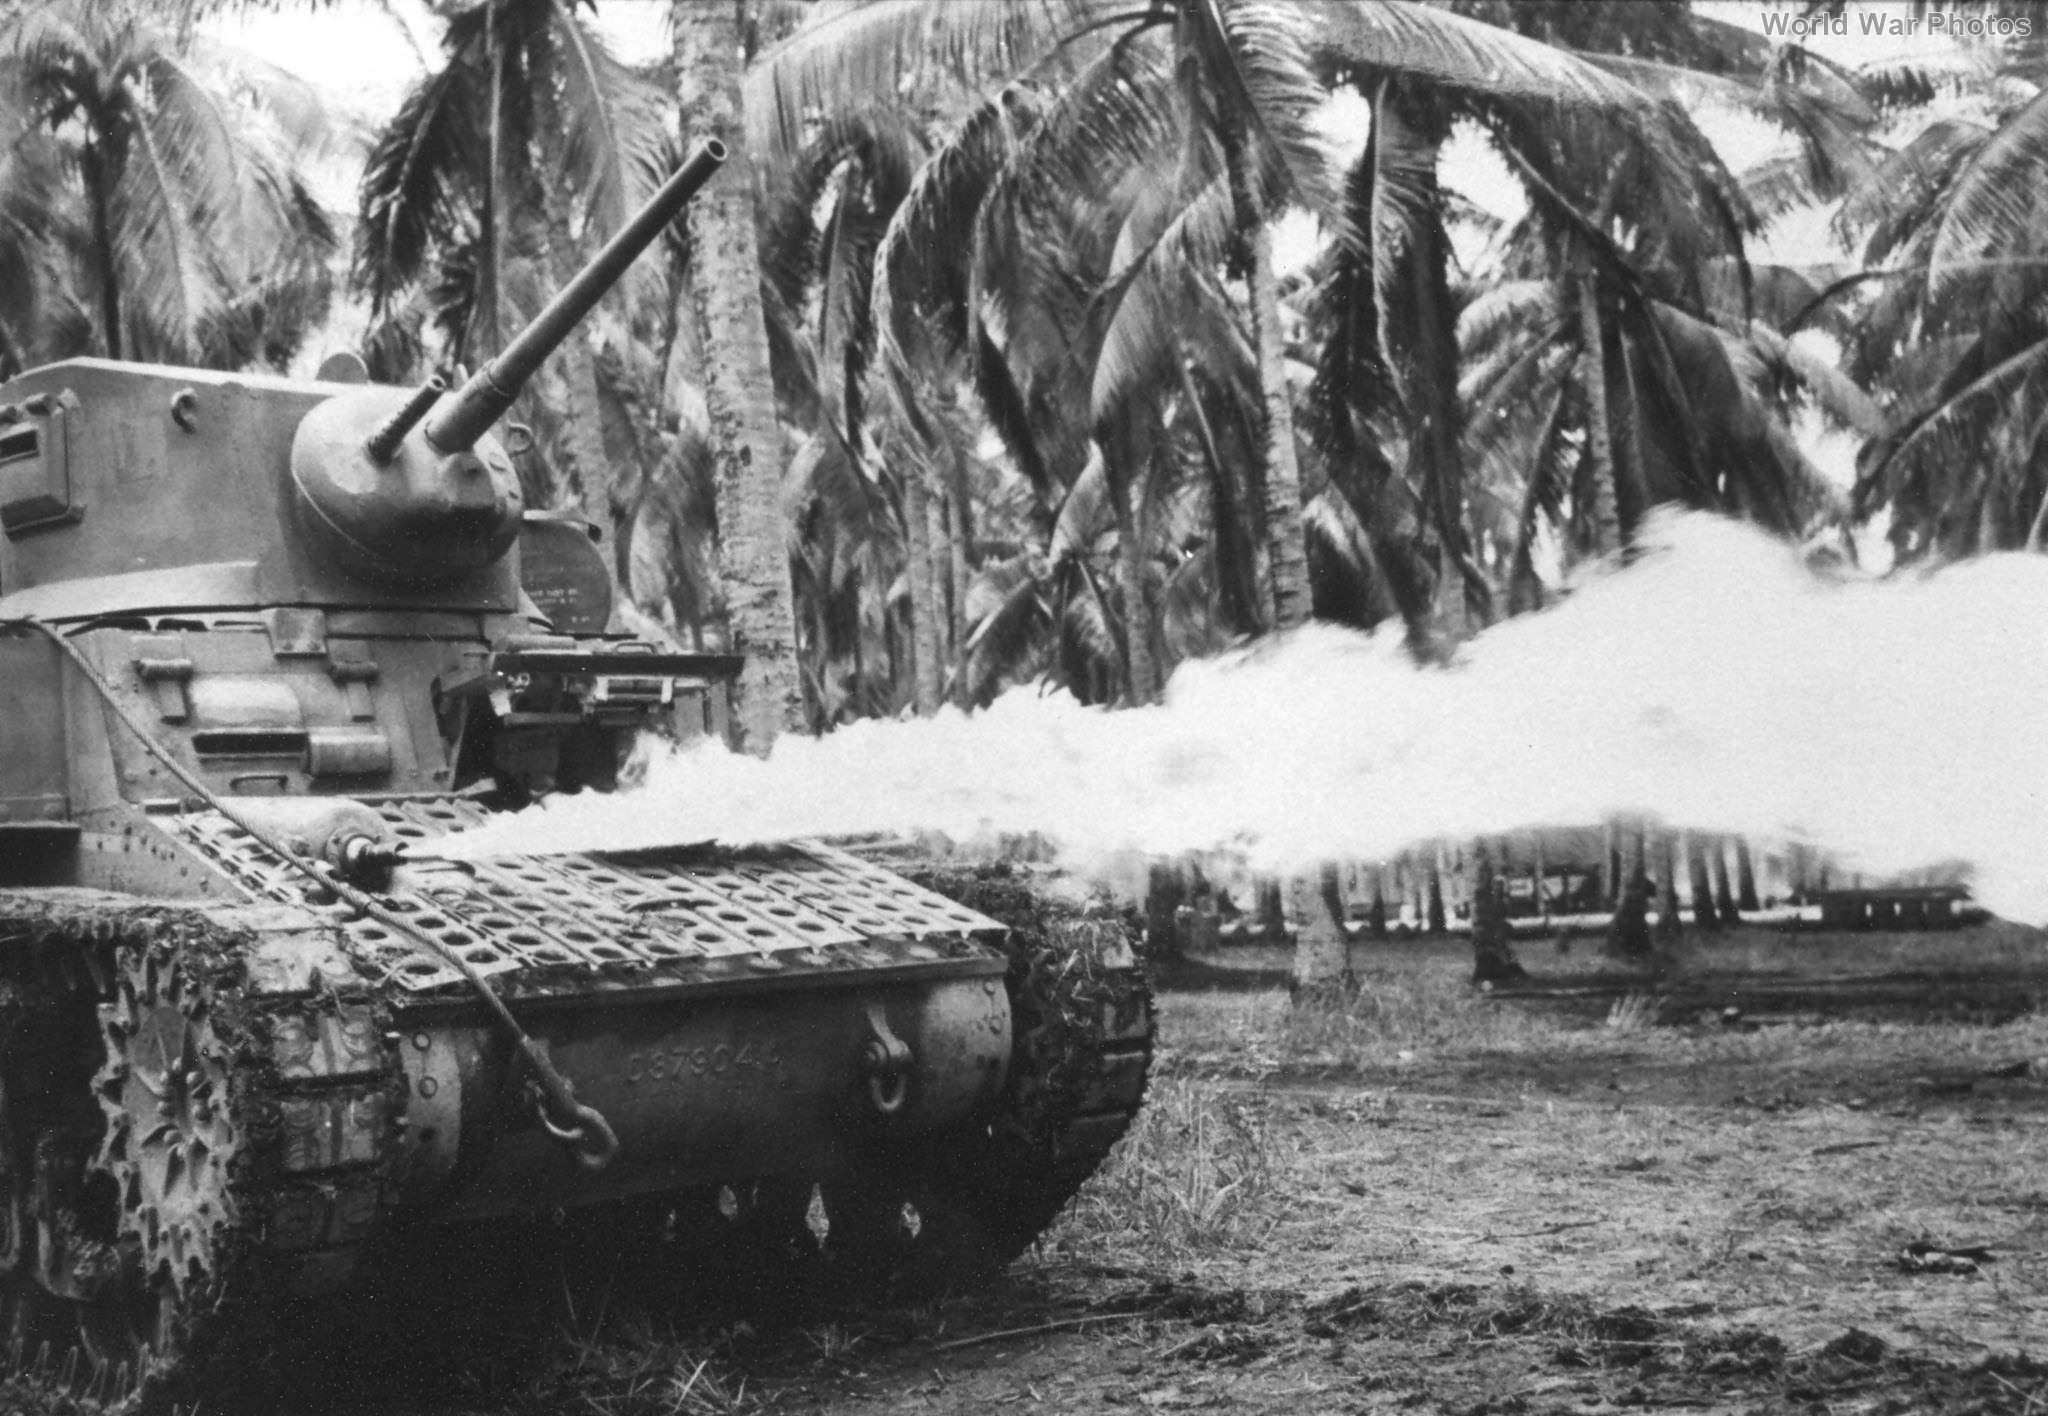 M3A1 Flame thrower